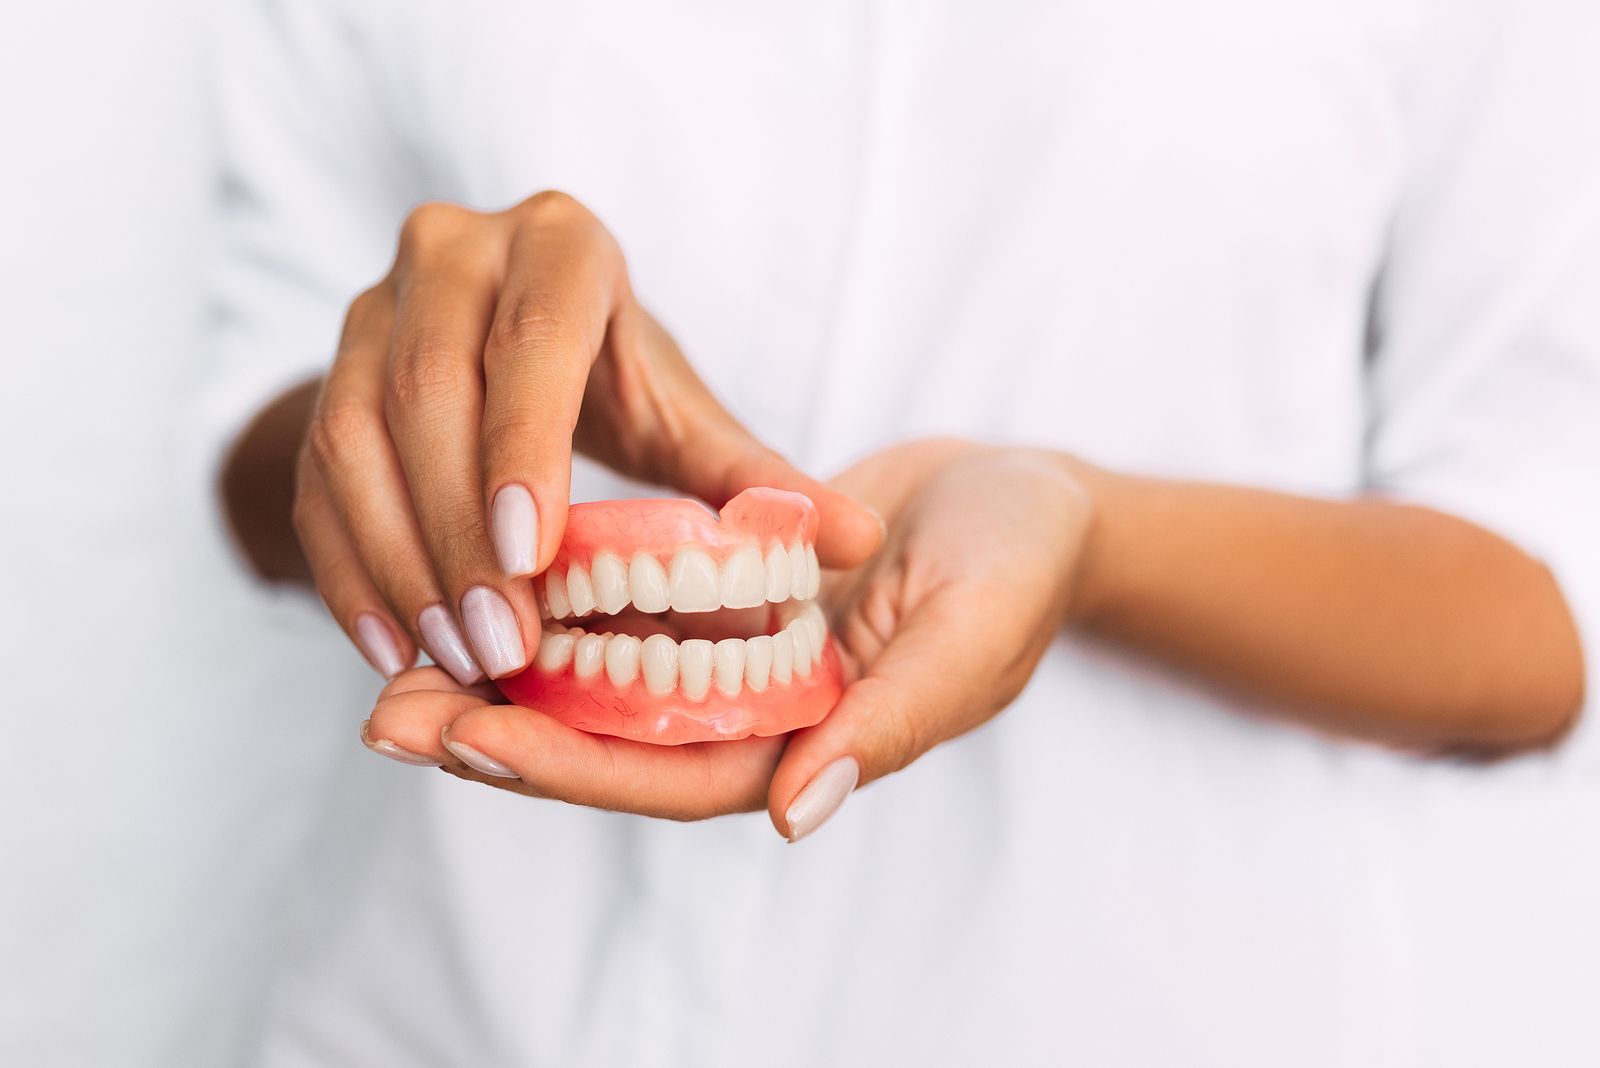 How do I have to clean my removable denture?